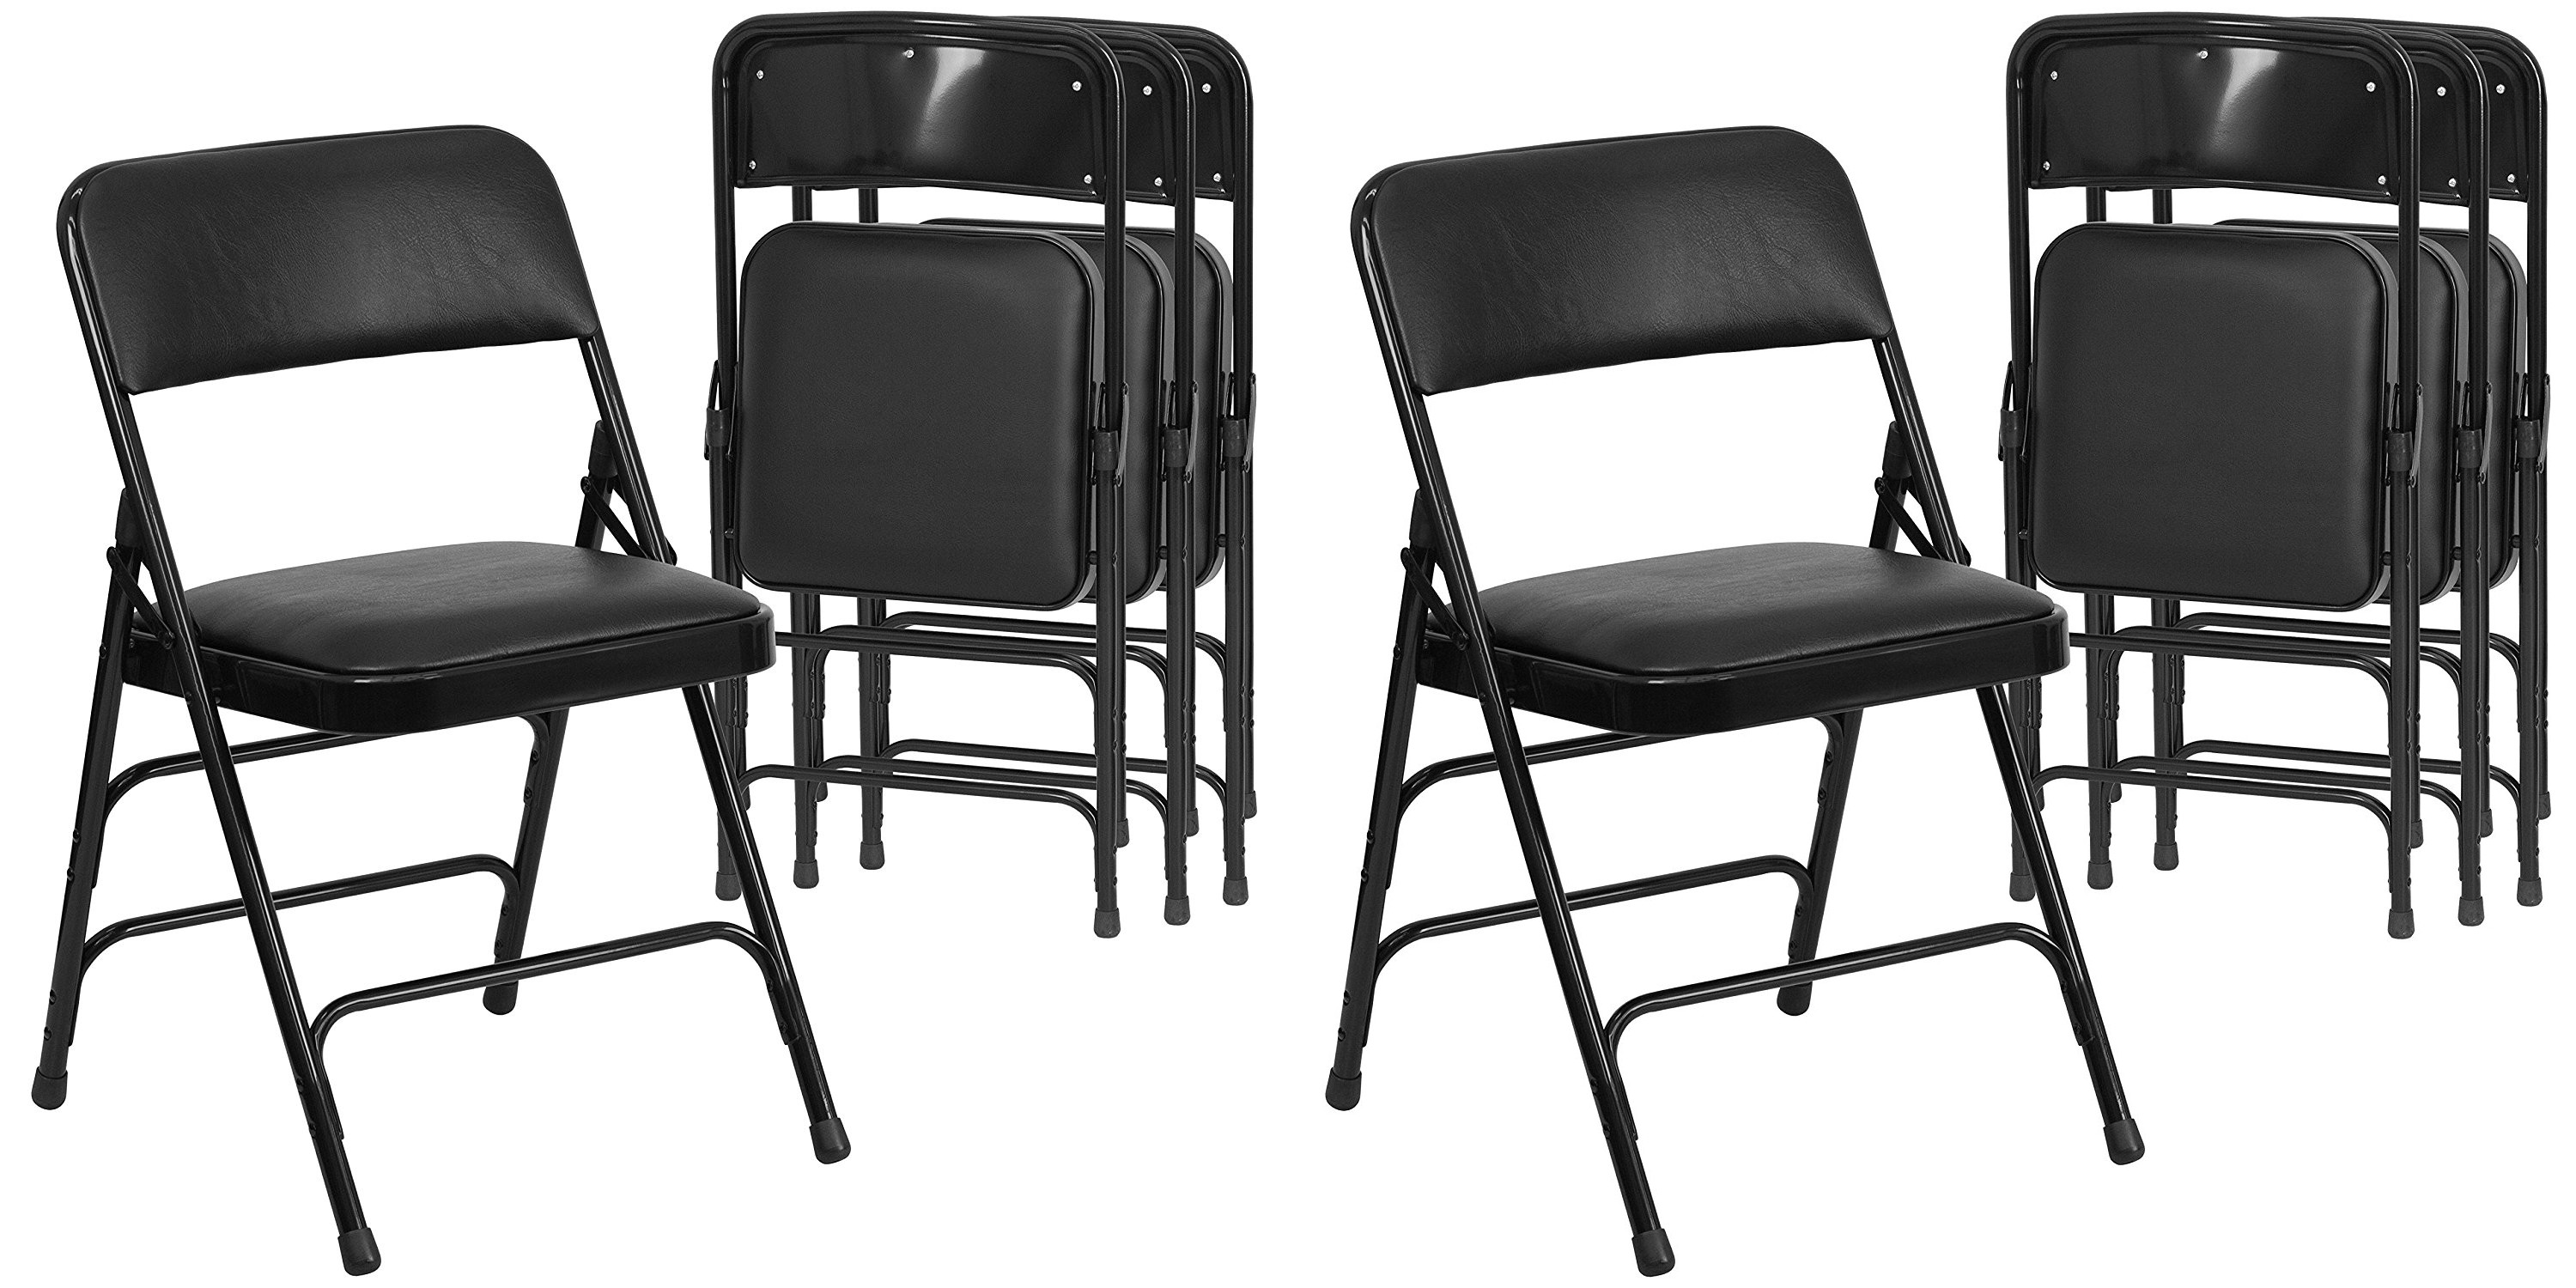 amazon is offering the hercules metal folding chairs for